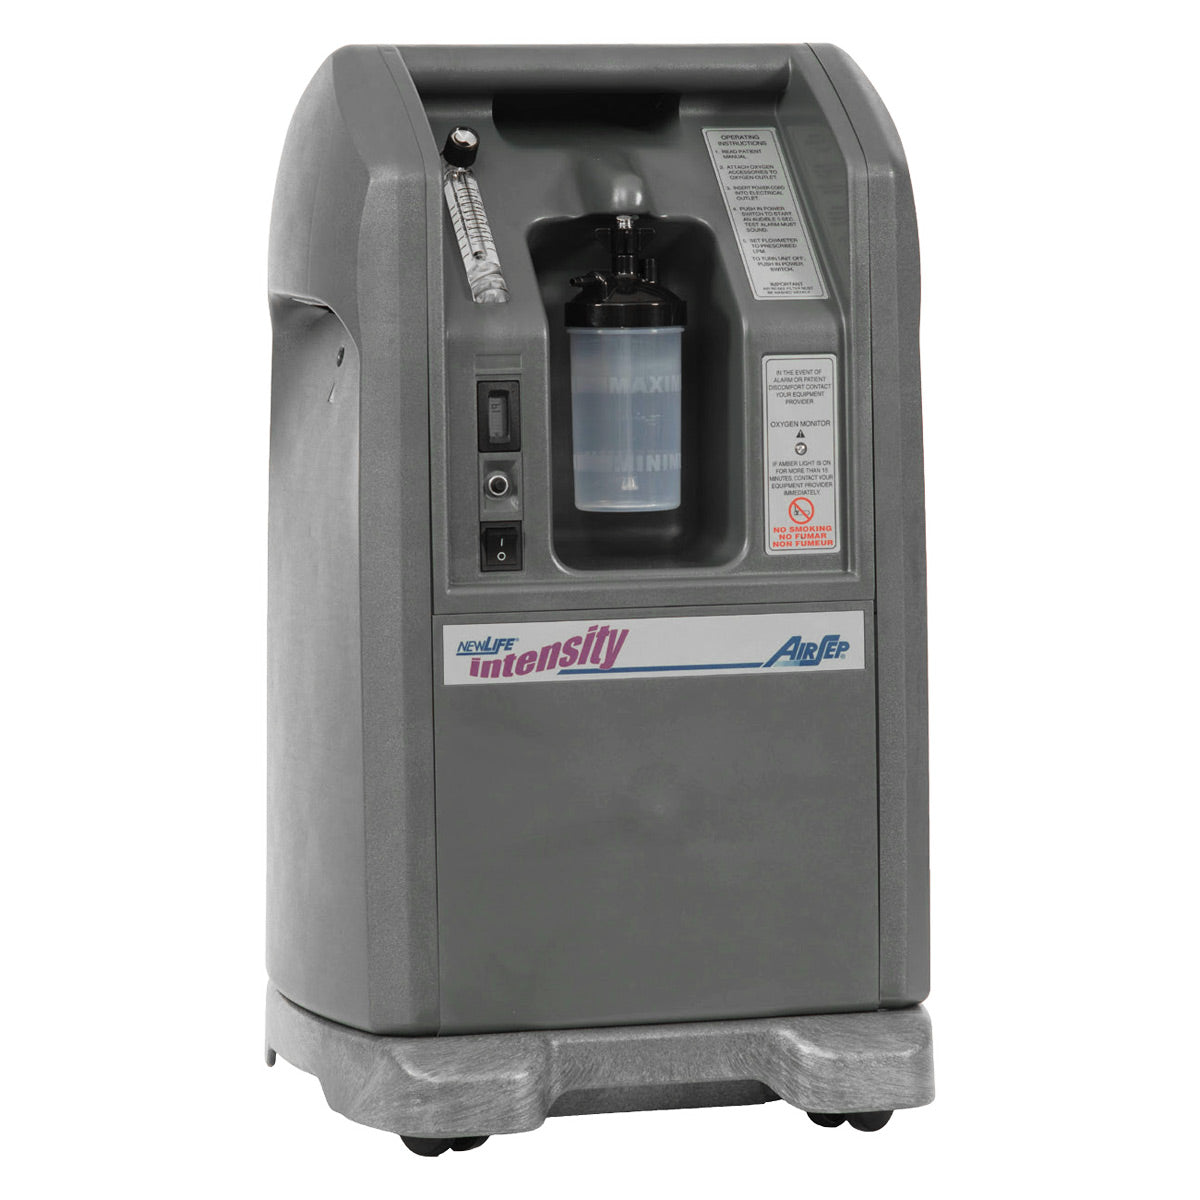 NewLife Intensity 10L Oxygen Concentrator